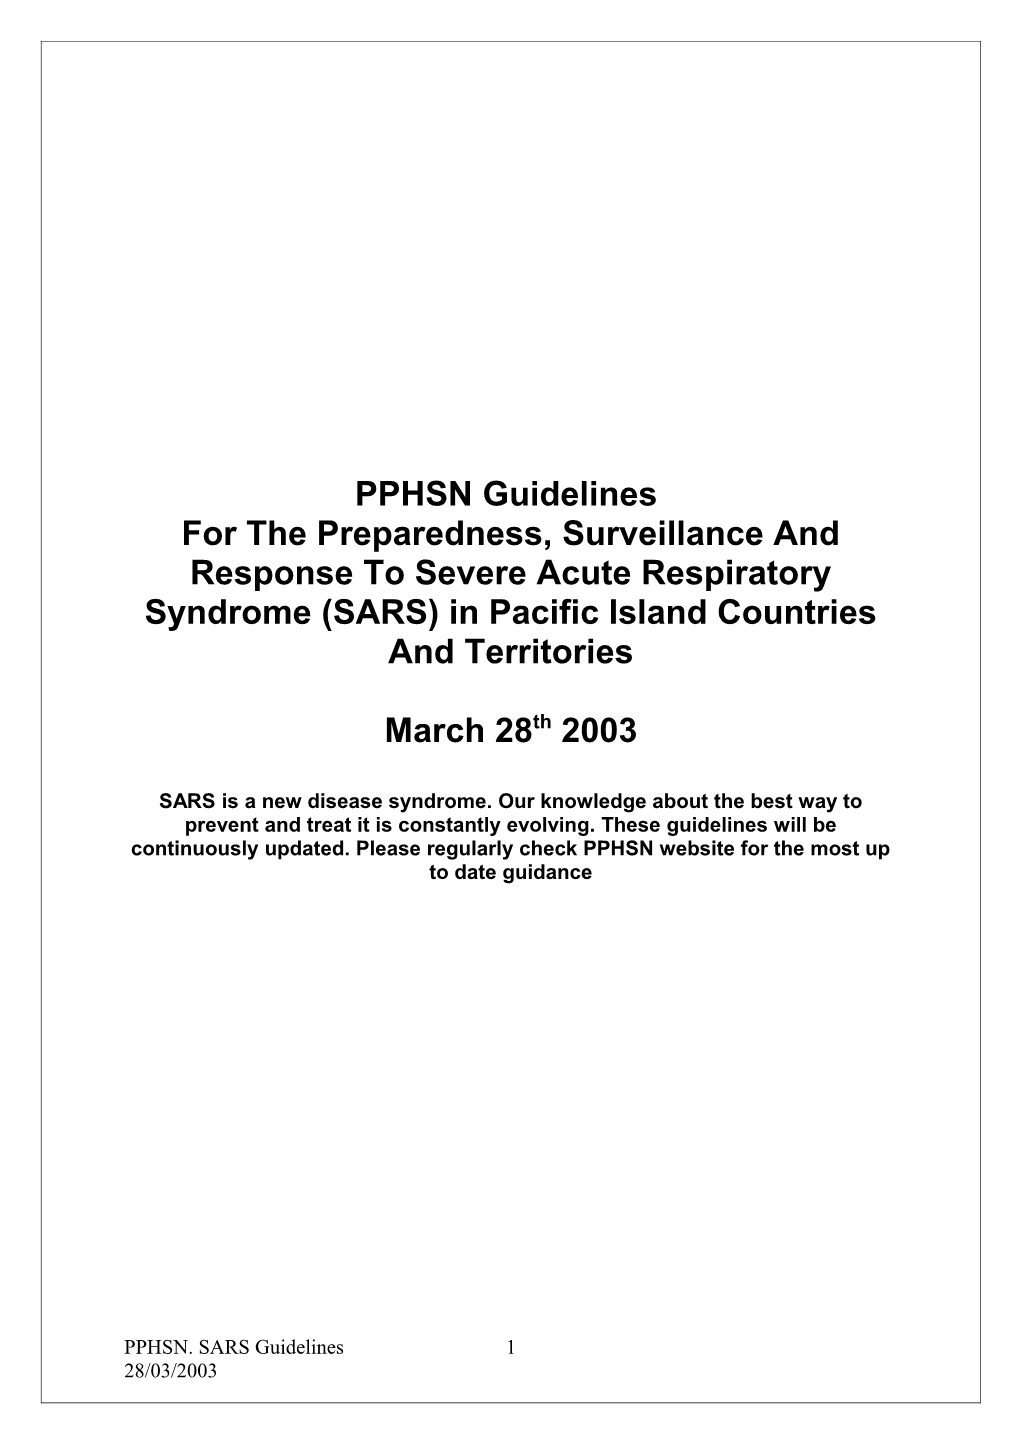 PPHSN Guidelines SARS 28Th March 03